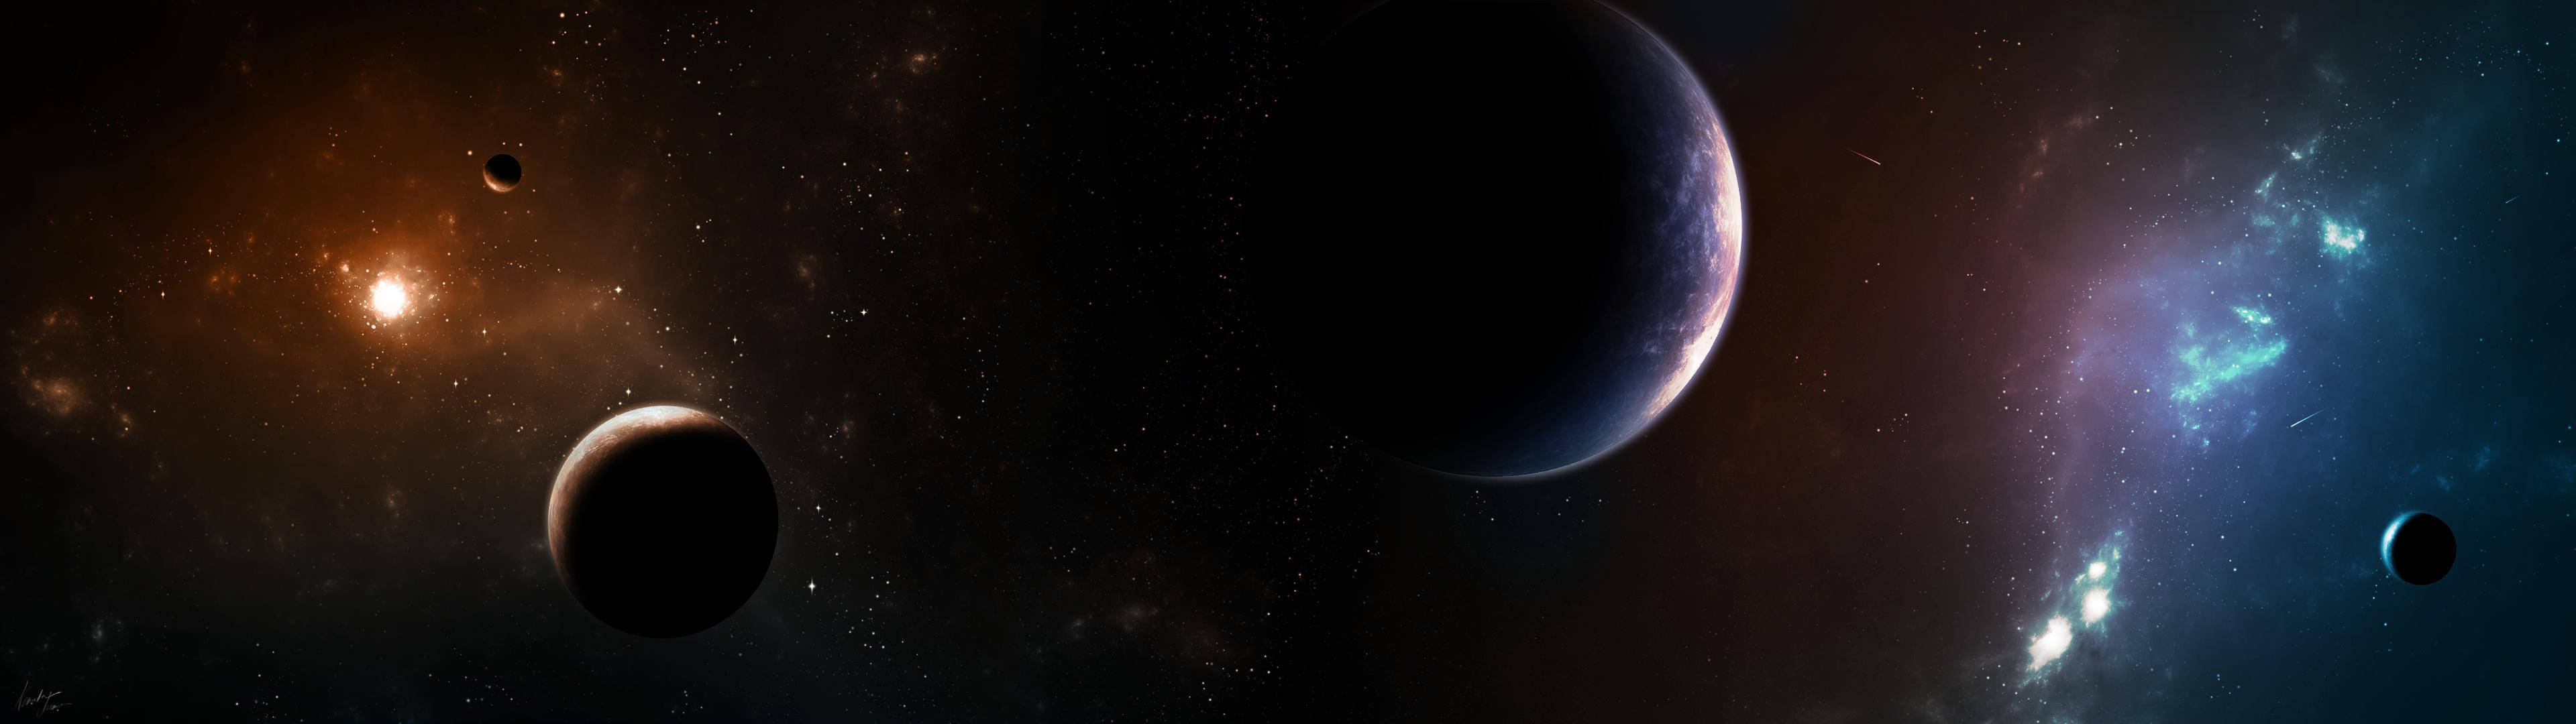 2 Monitor Stars And Planets Background